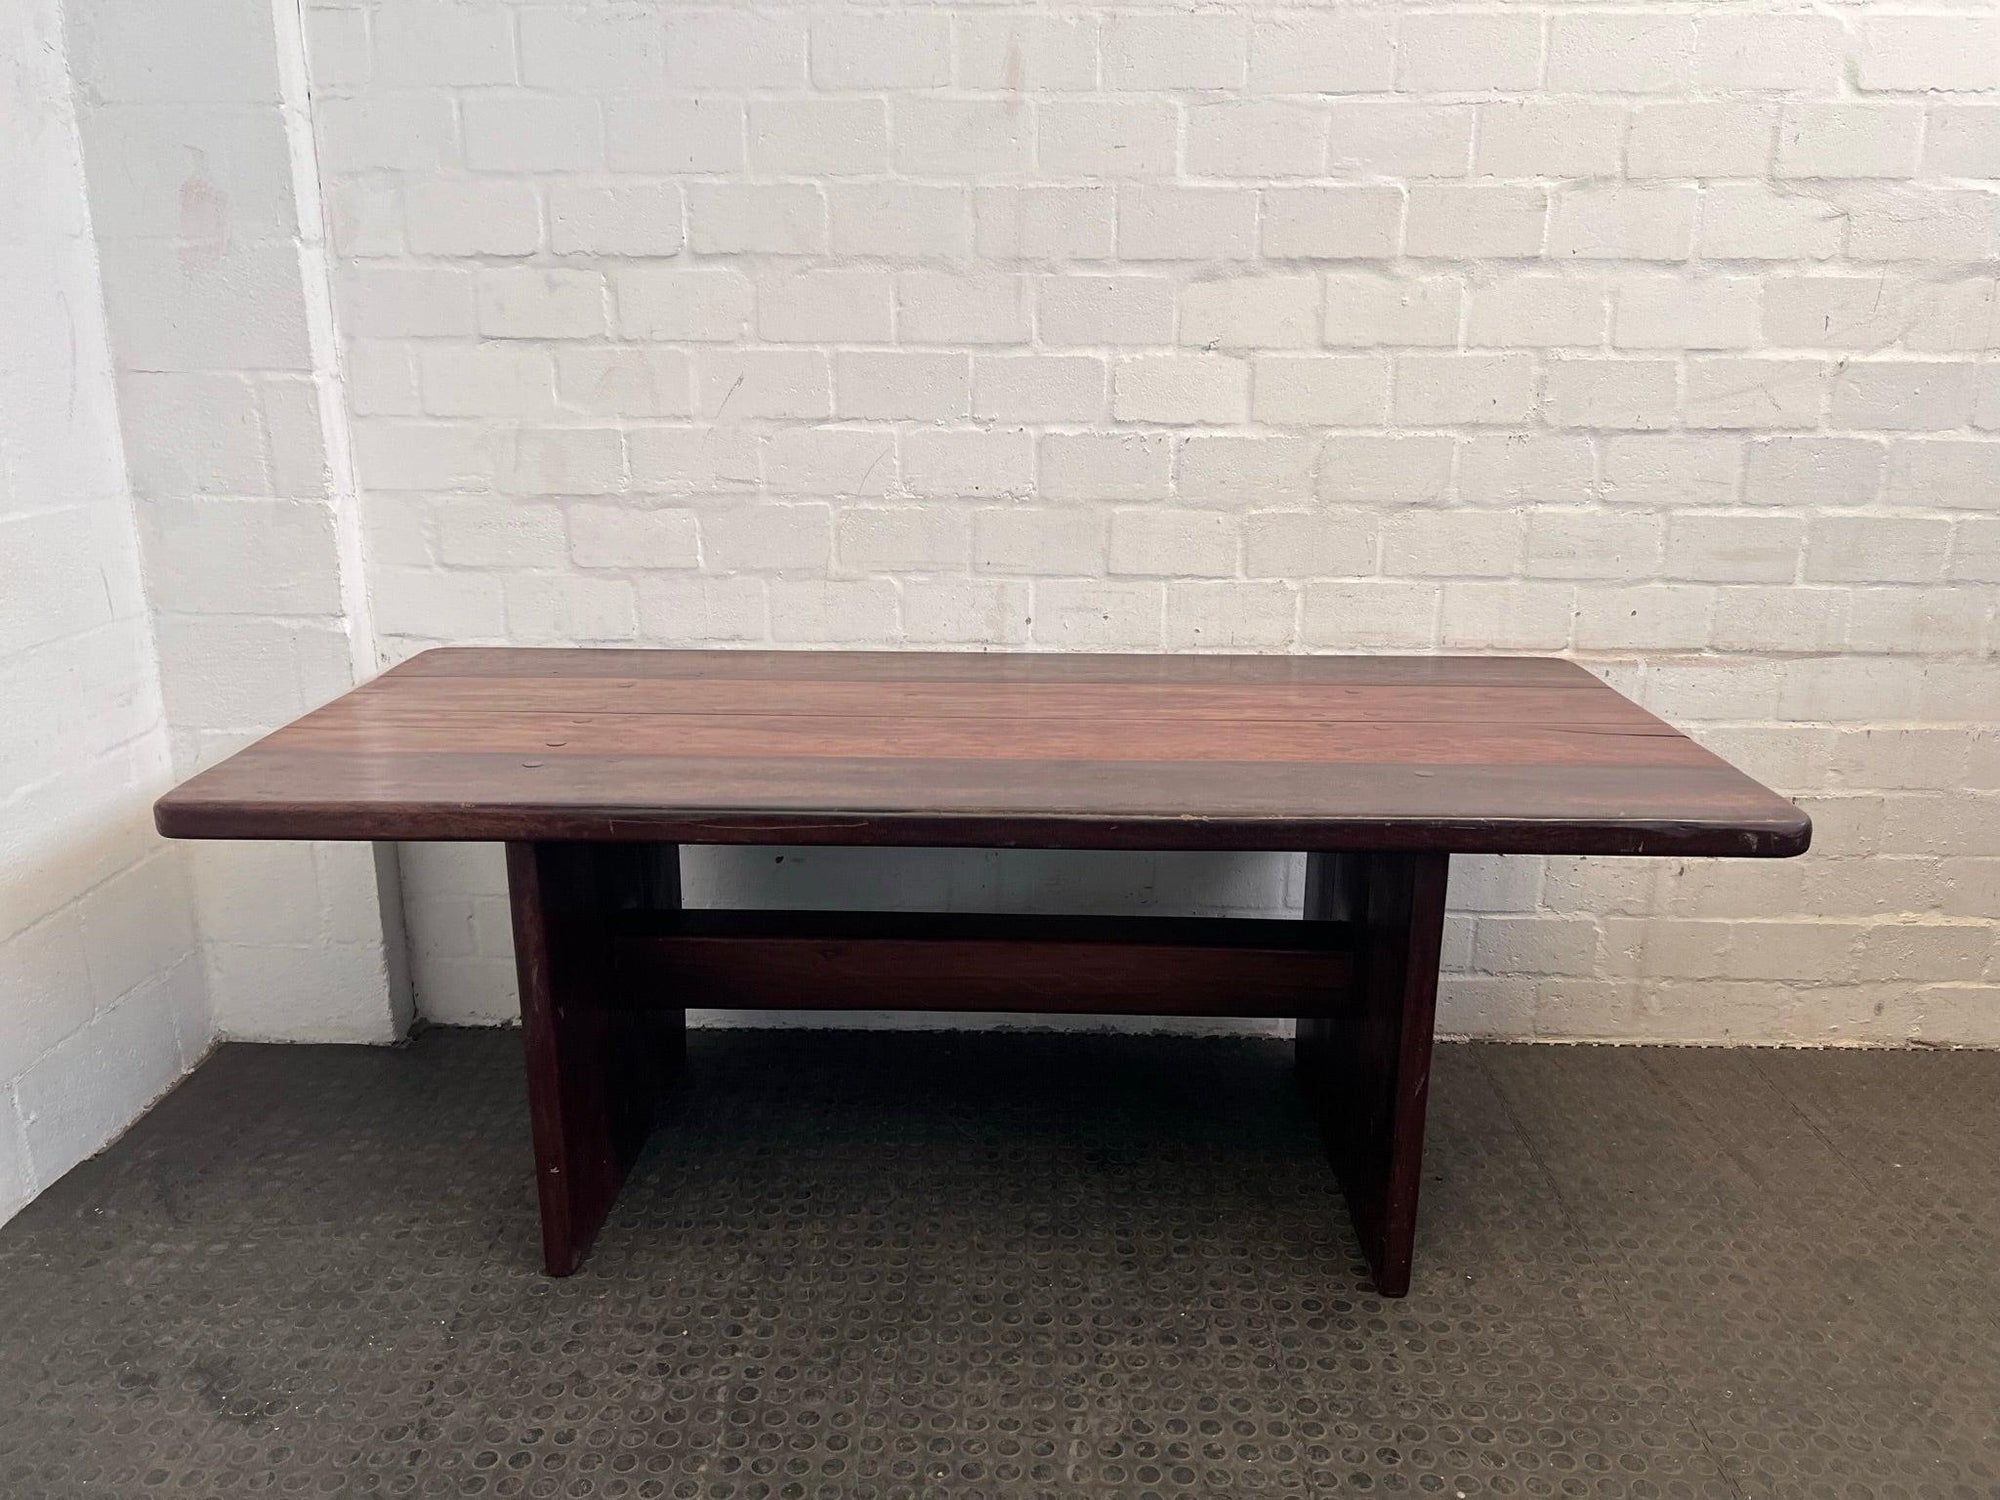 6 Seater Ironwood Dining Room Table - REDUCED